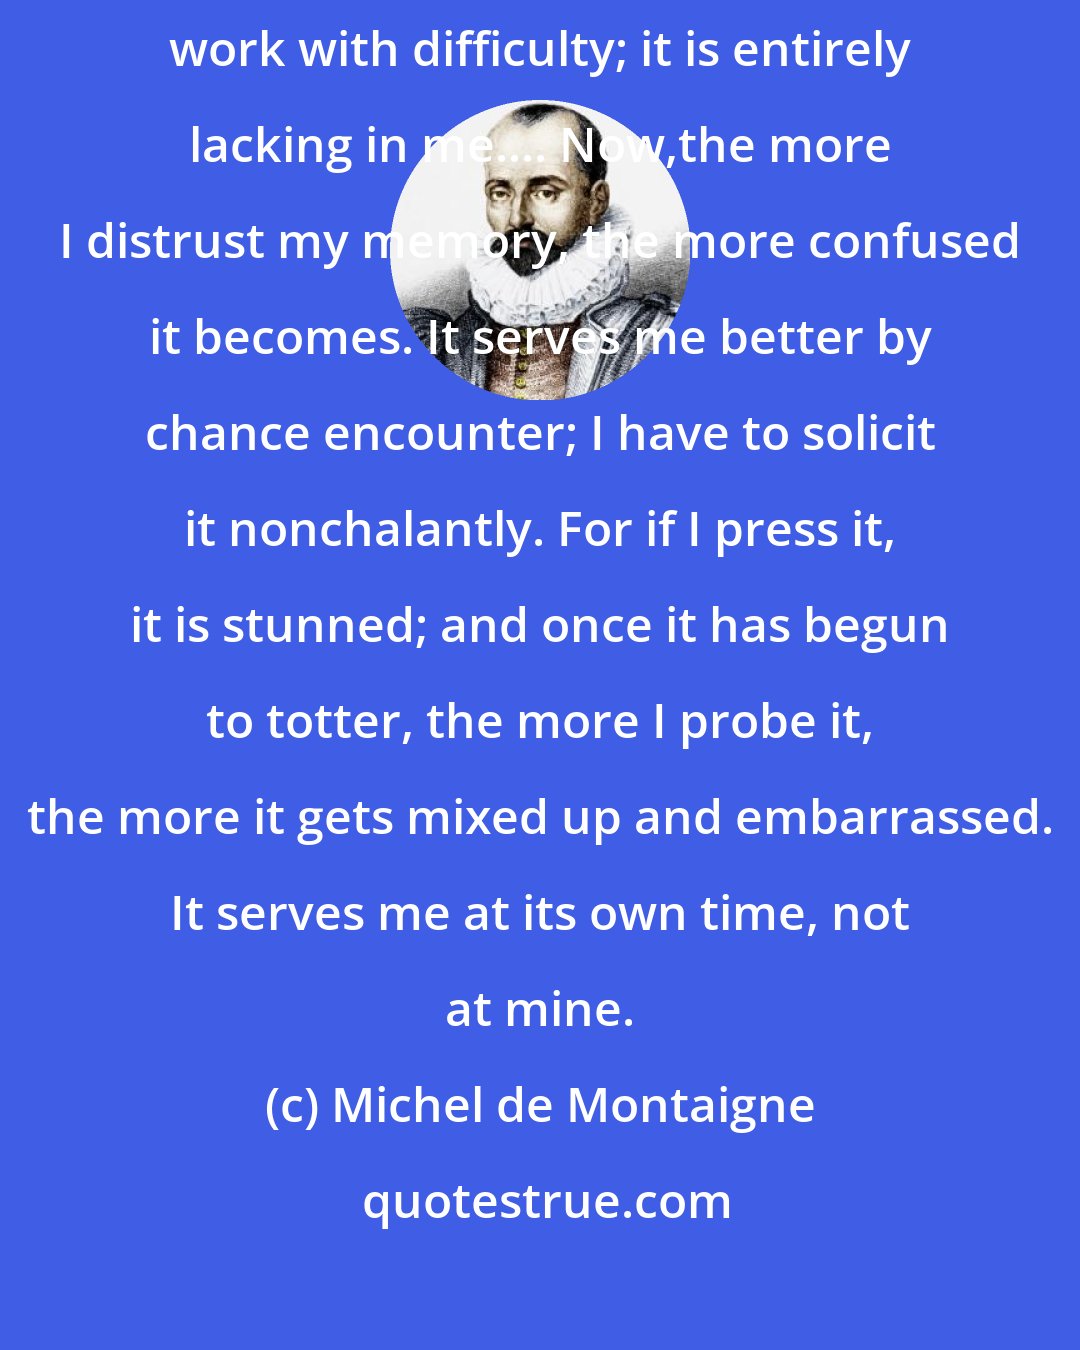 Michel de Montaigne: Memory is a wonderfully useful tool, and without it judgement does its work with difficulty; it is entirely lacking in me.... Now,the more I distrust my memory, the more confused it becomes. It serves me better by chance encounter; I have to solicit it nonchalantly. For if I press it, it is stunned; and once it has begun to totter, the more I probe it, the more it gets mixed up and embarrassed. It serves me at its own time, not at mine.